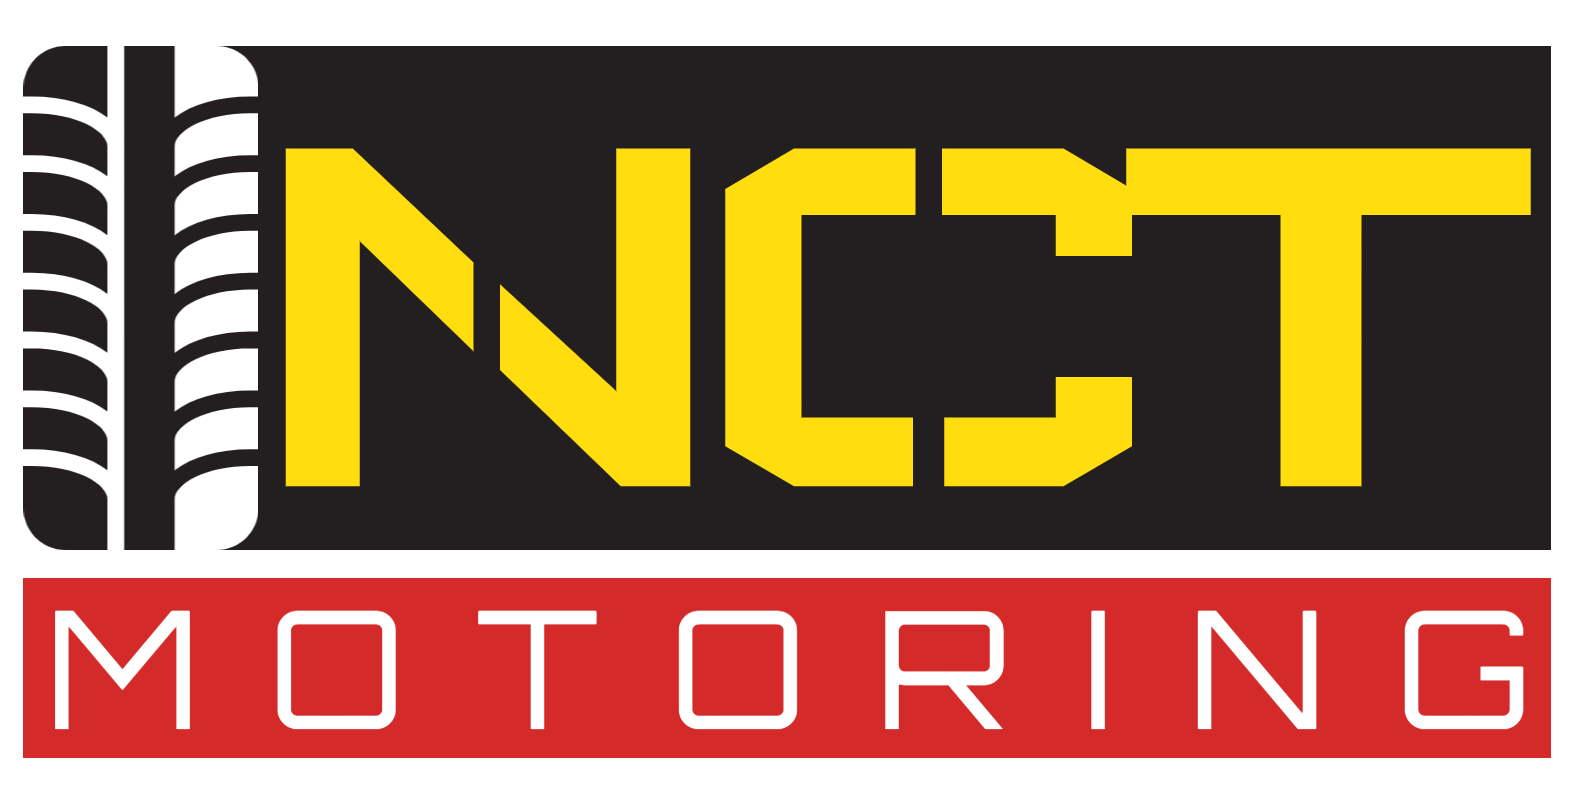 Custom Wheels & Discount Tires at Low Wholesale Prices! - NCT Motoring